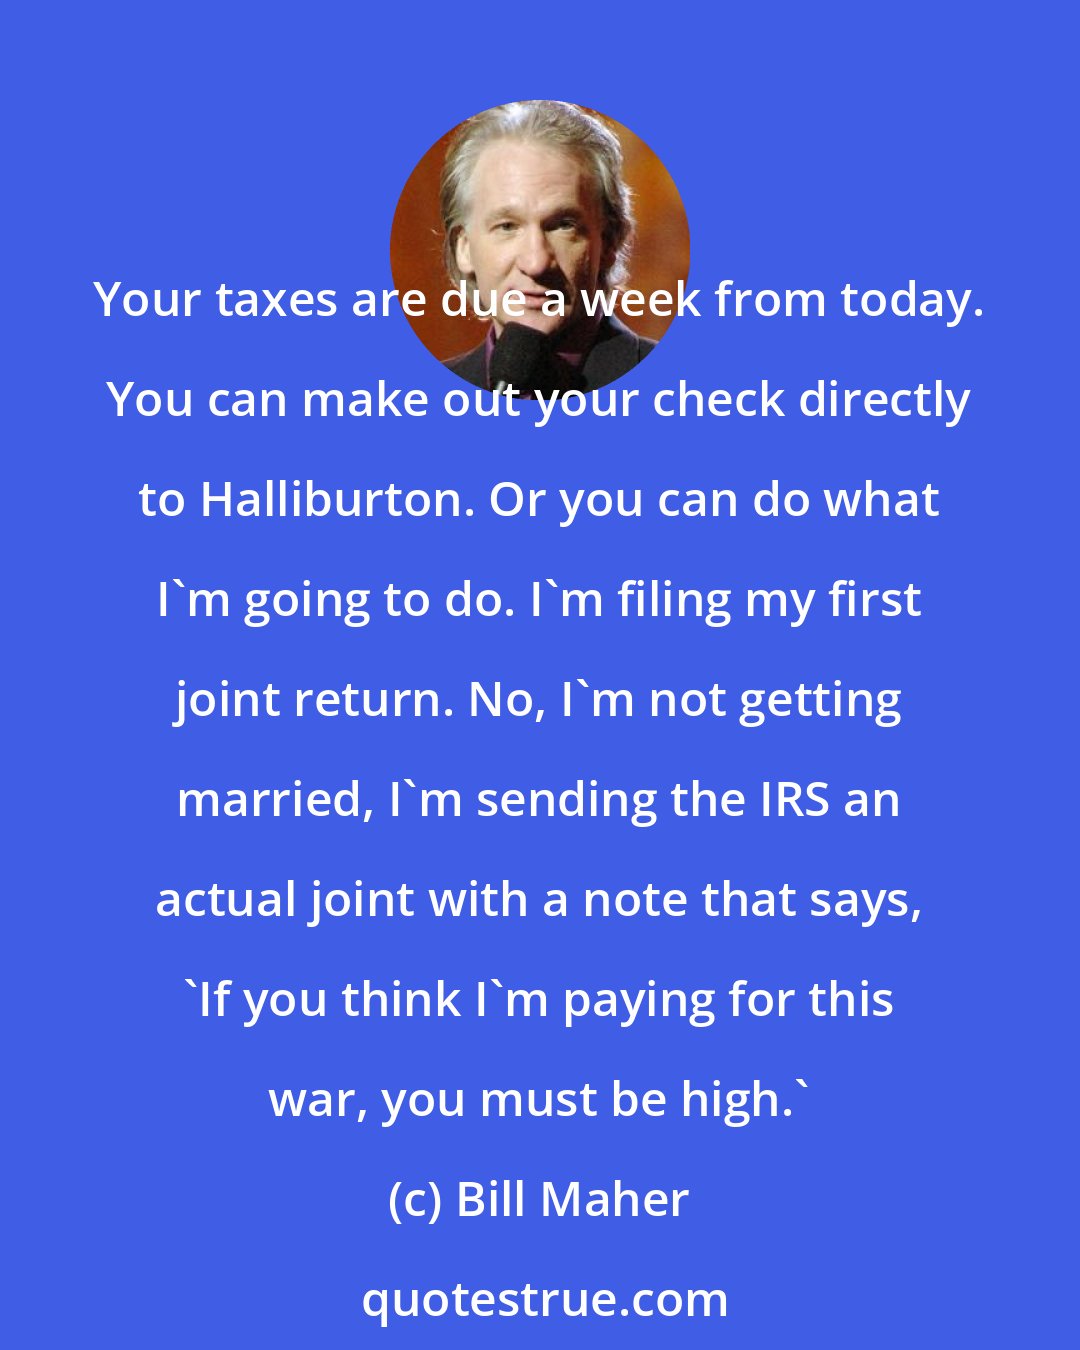 Bill Maher: Your taxes are due a week from today. You can make out your check directly to Halliburton. Or you can do what I'm going to do. I'm filing my first joint return. No, I'm not getting married, I'm sending the IRS an actual joint with a note that says, 'If you think I'm paying for this war, you must be high.'